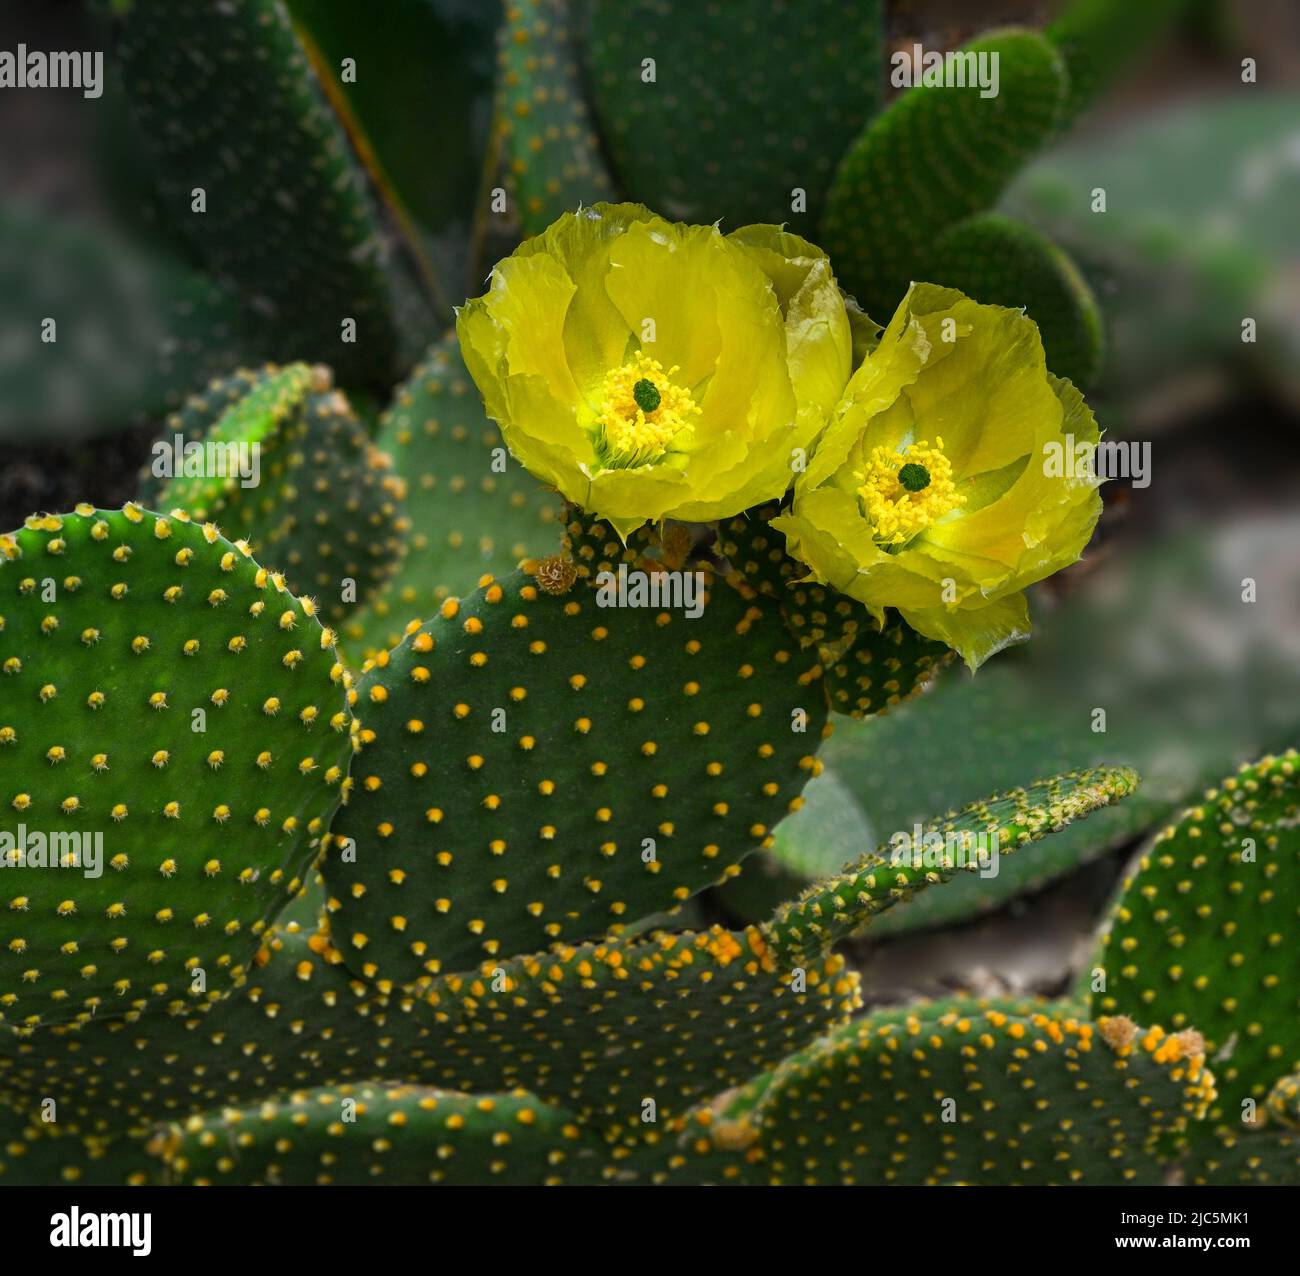 Prickly pears cactus (opuntia microdasys) with golden flowers. Stock Photo